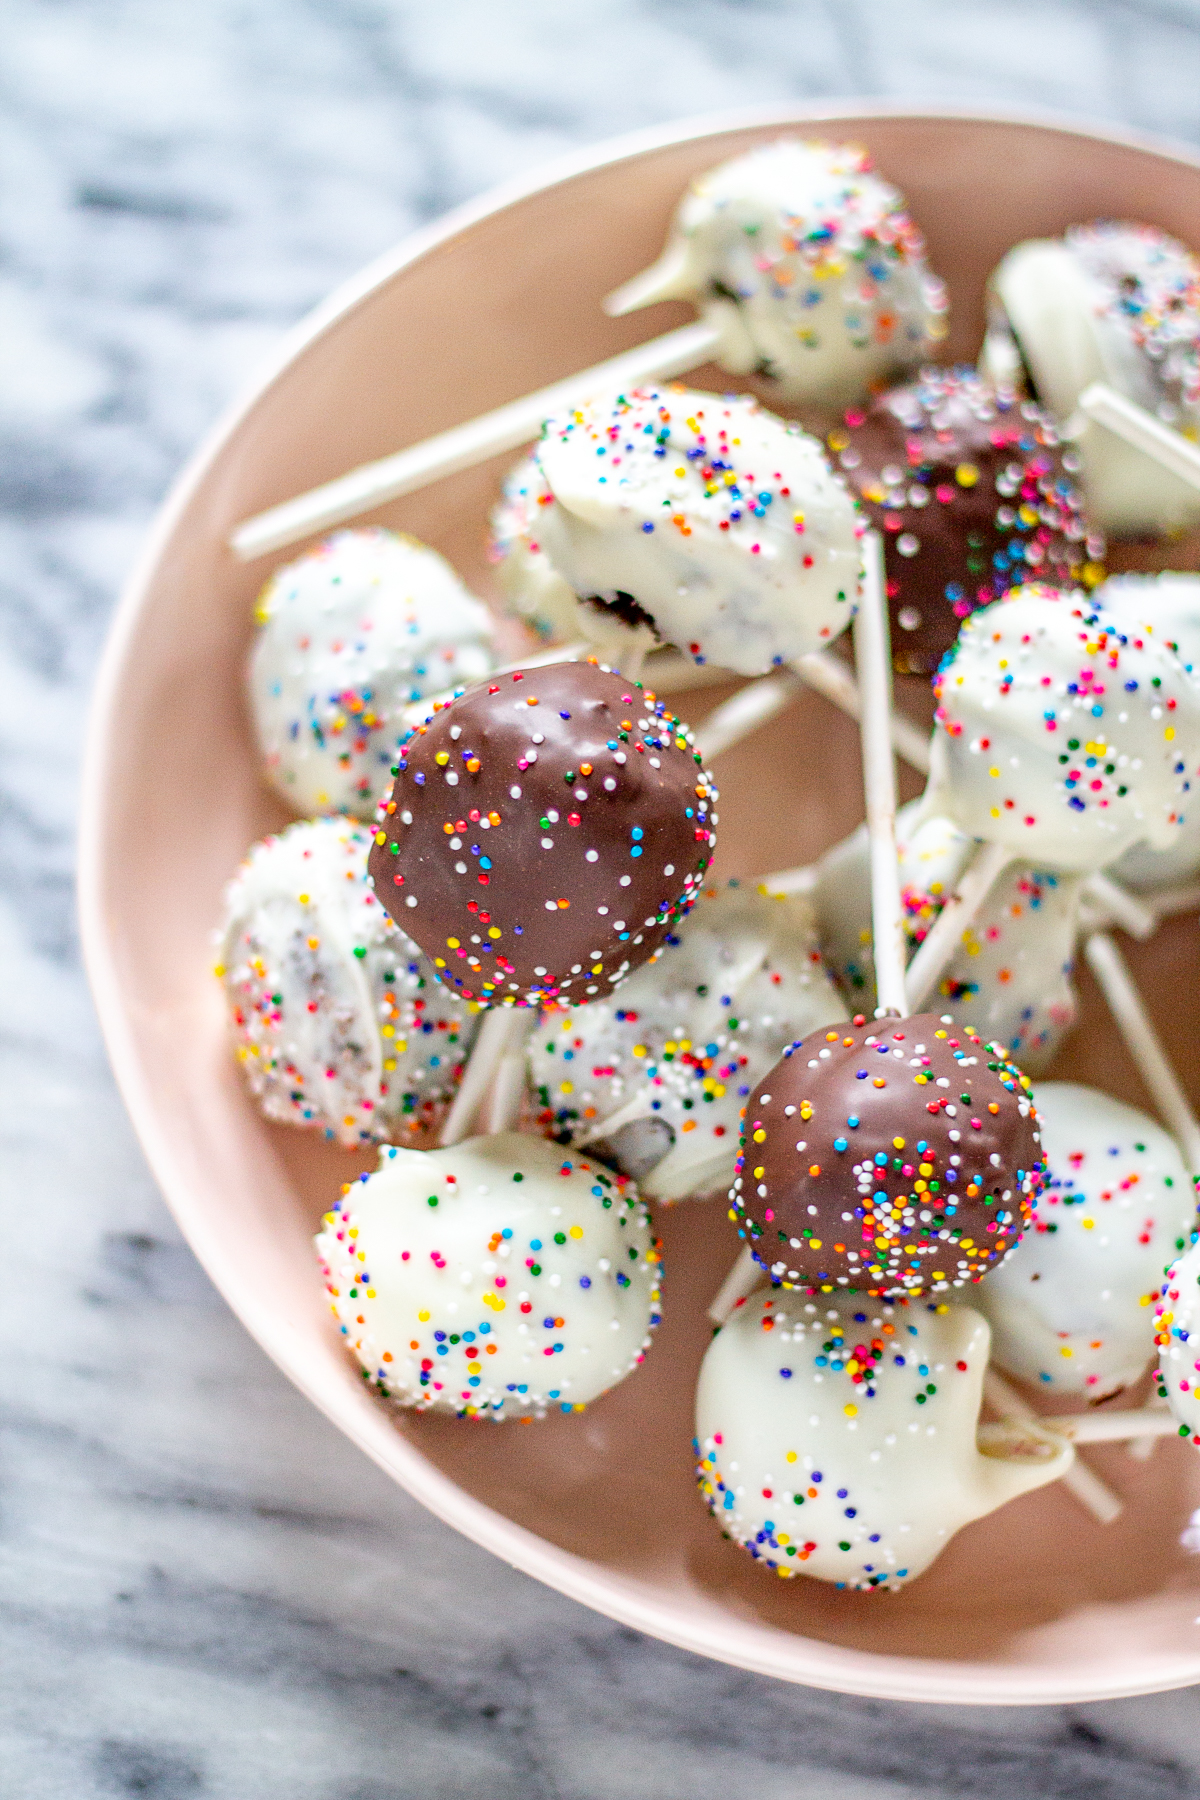 Can You Make Cake Pops Without Frosting